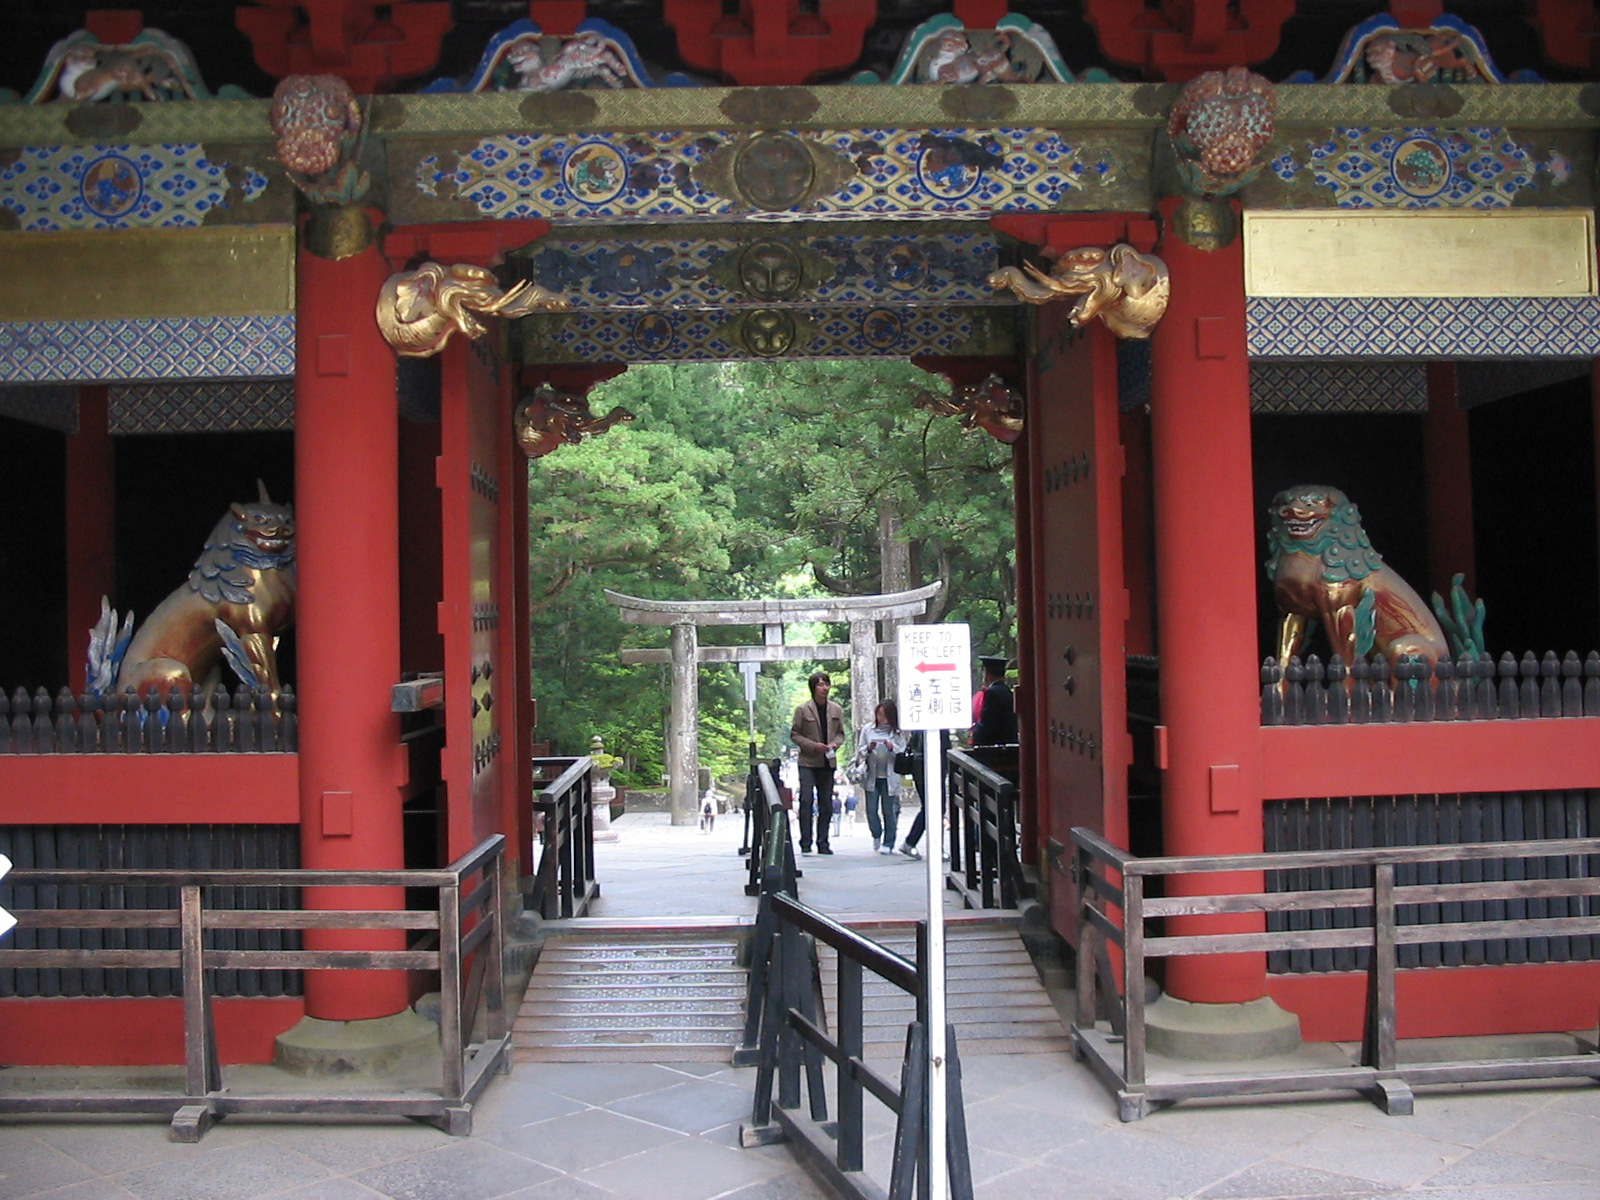 red wooden gate with decorations and view of stone torri gate through entrance